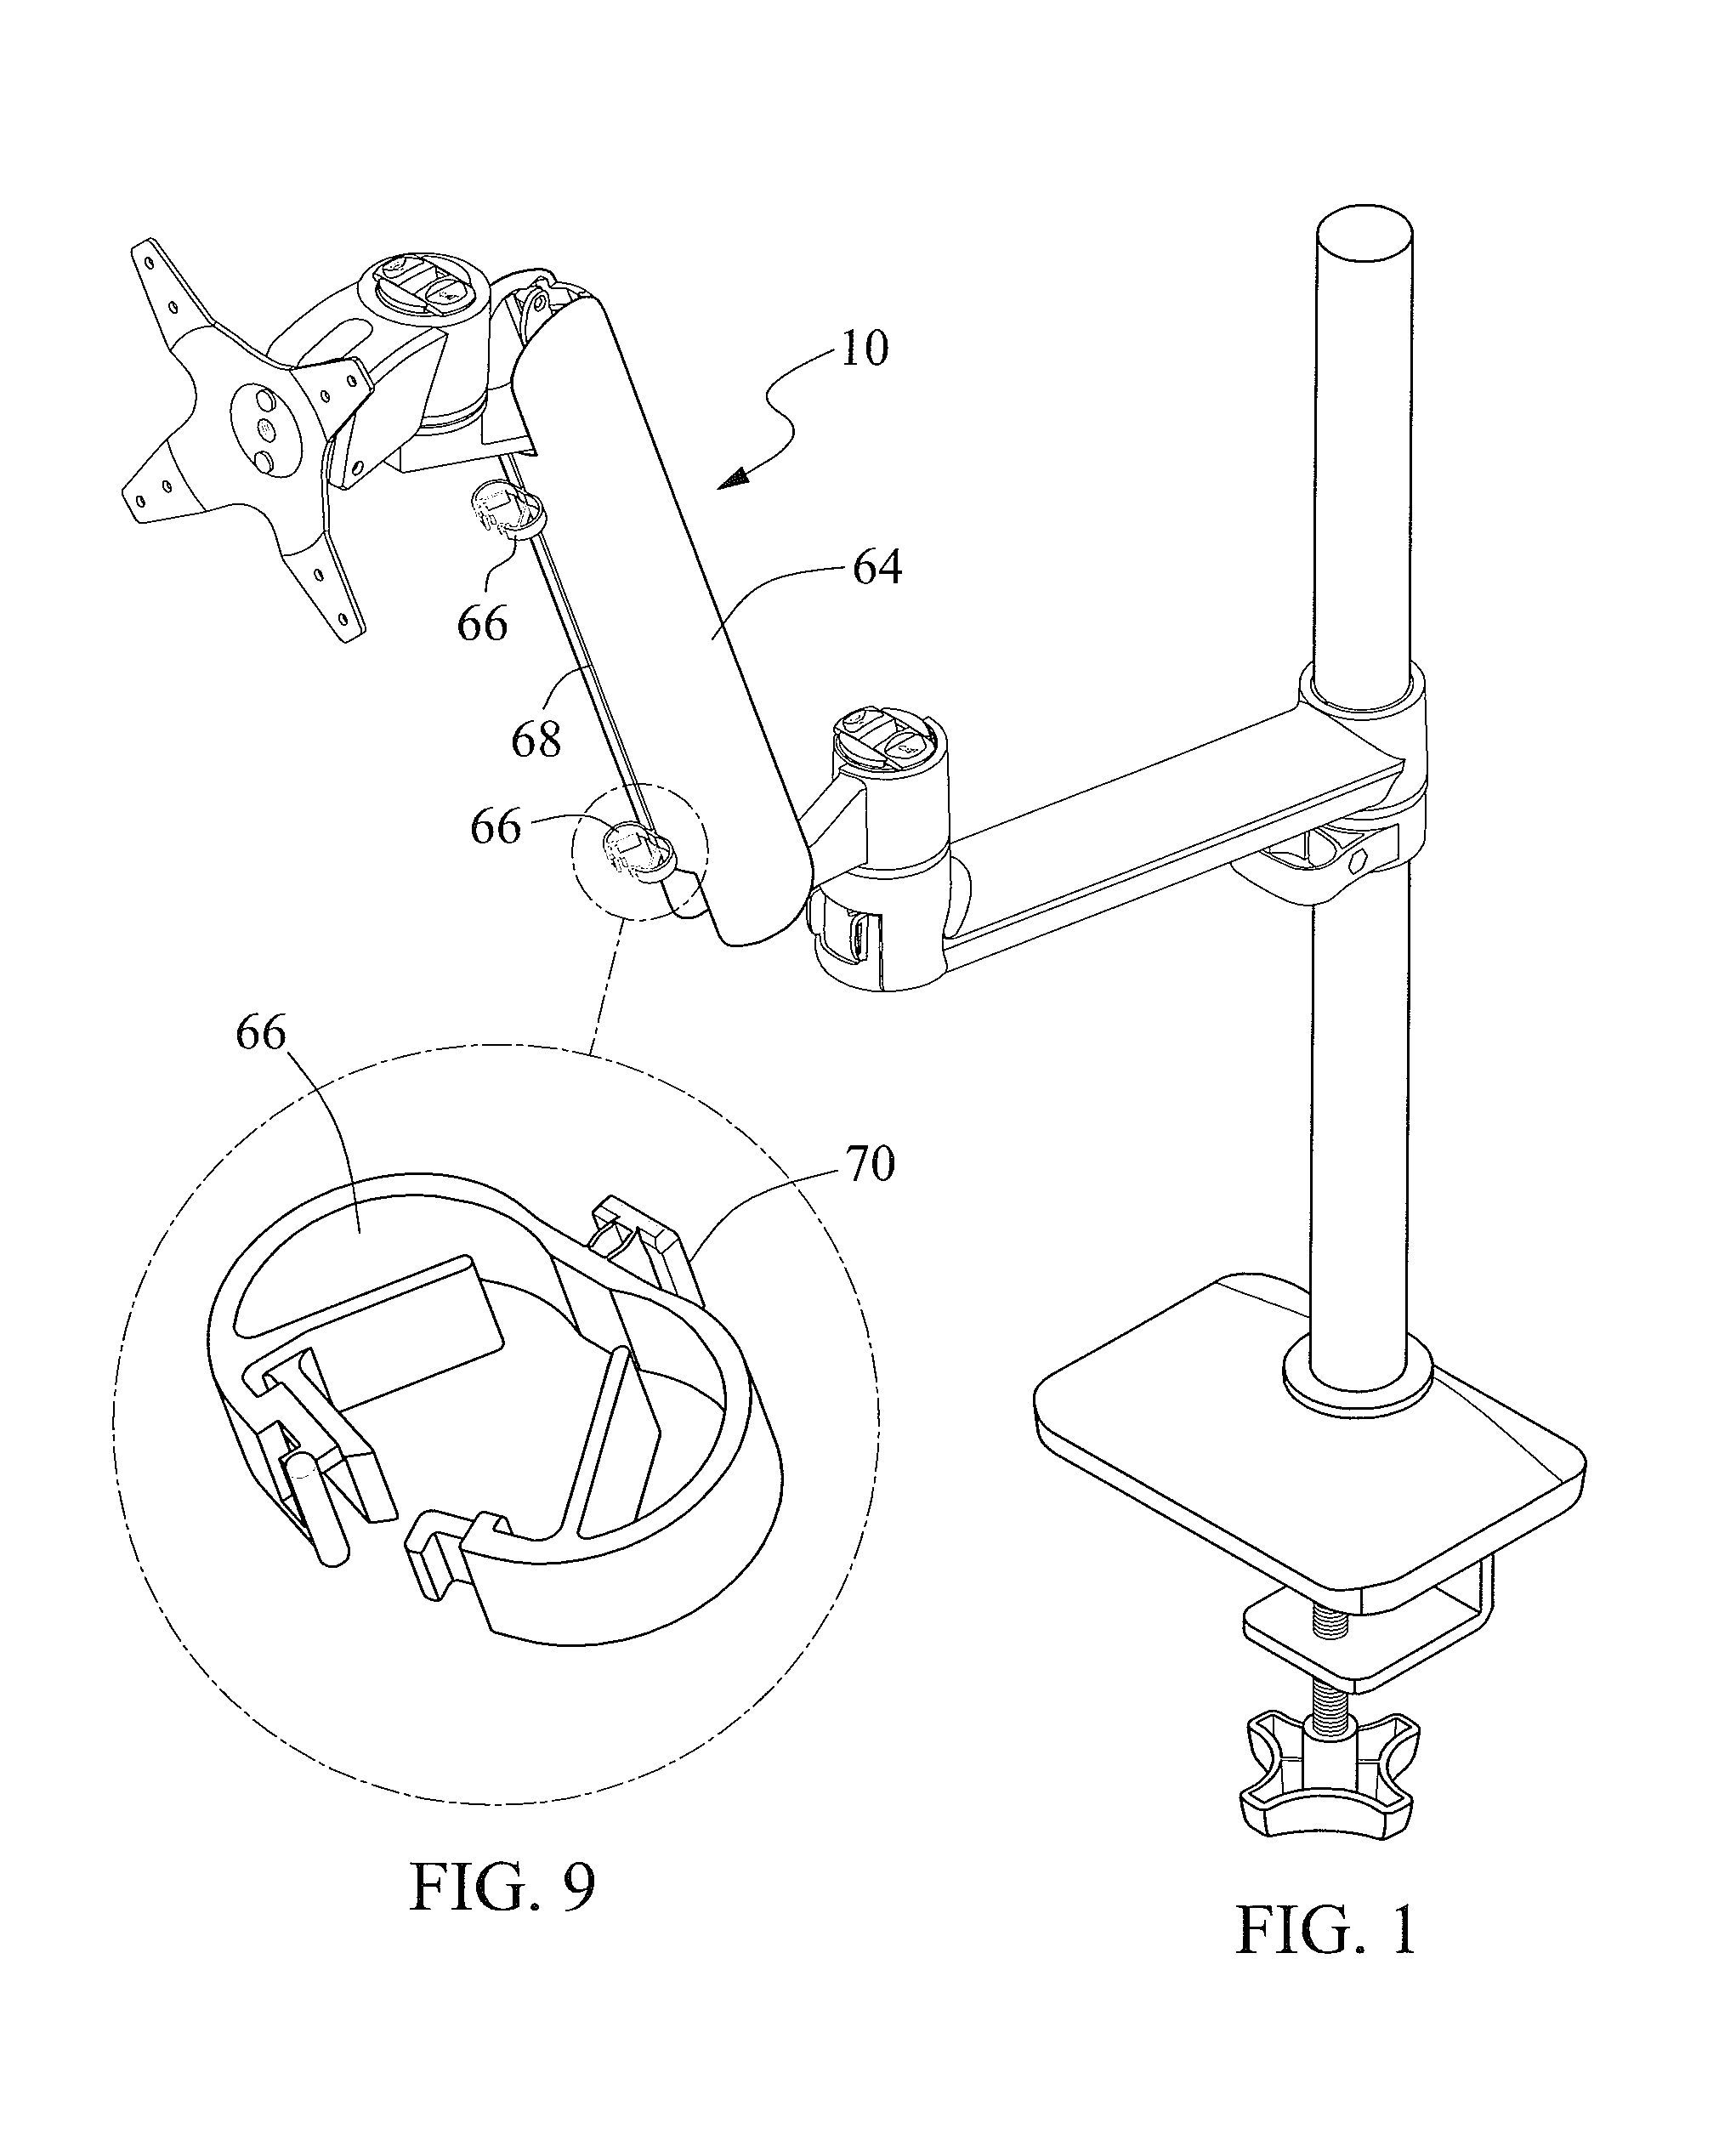 Load supporting apparatus